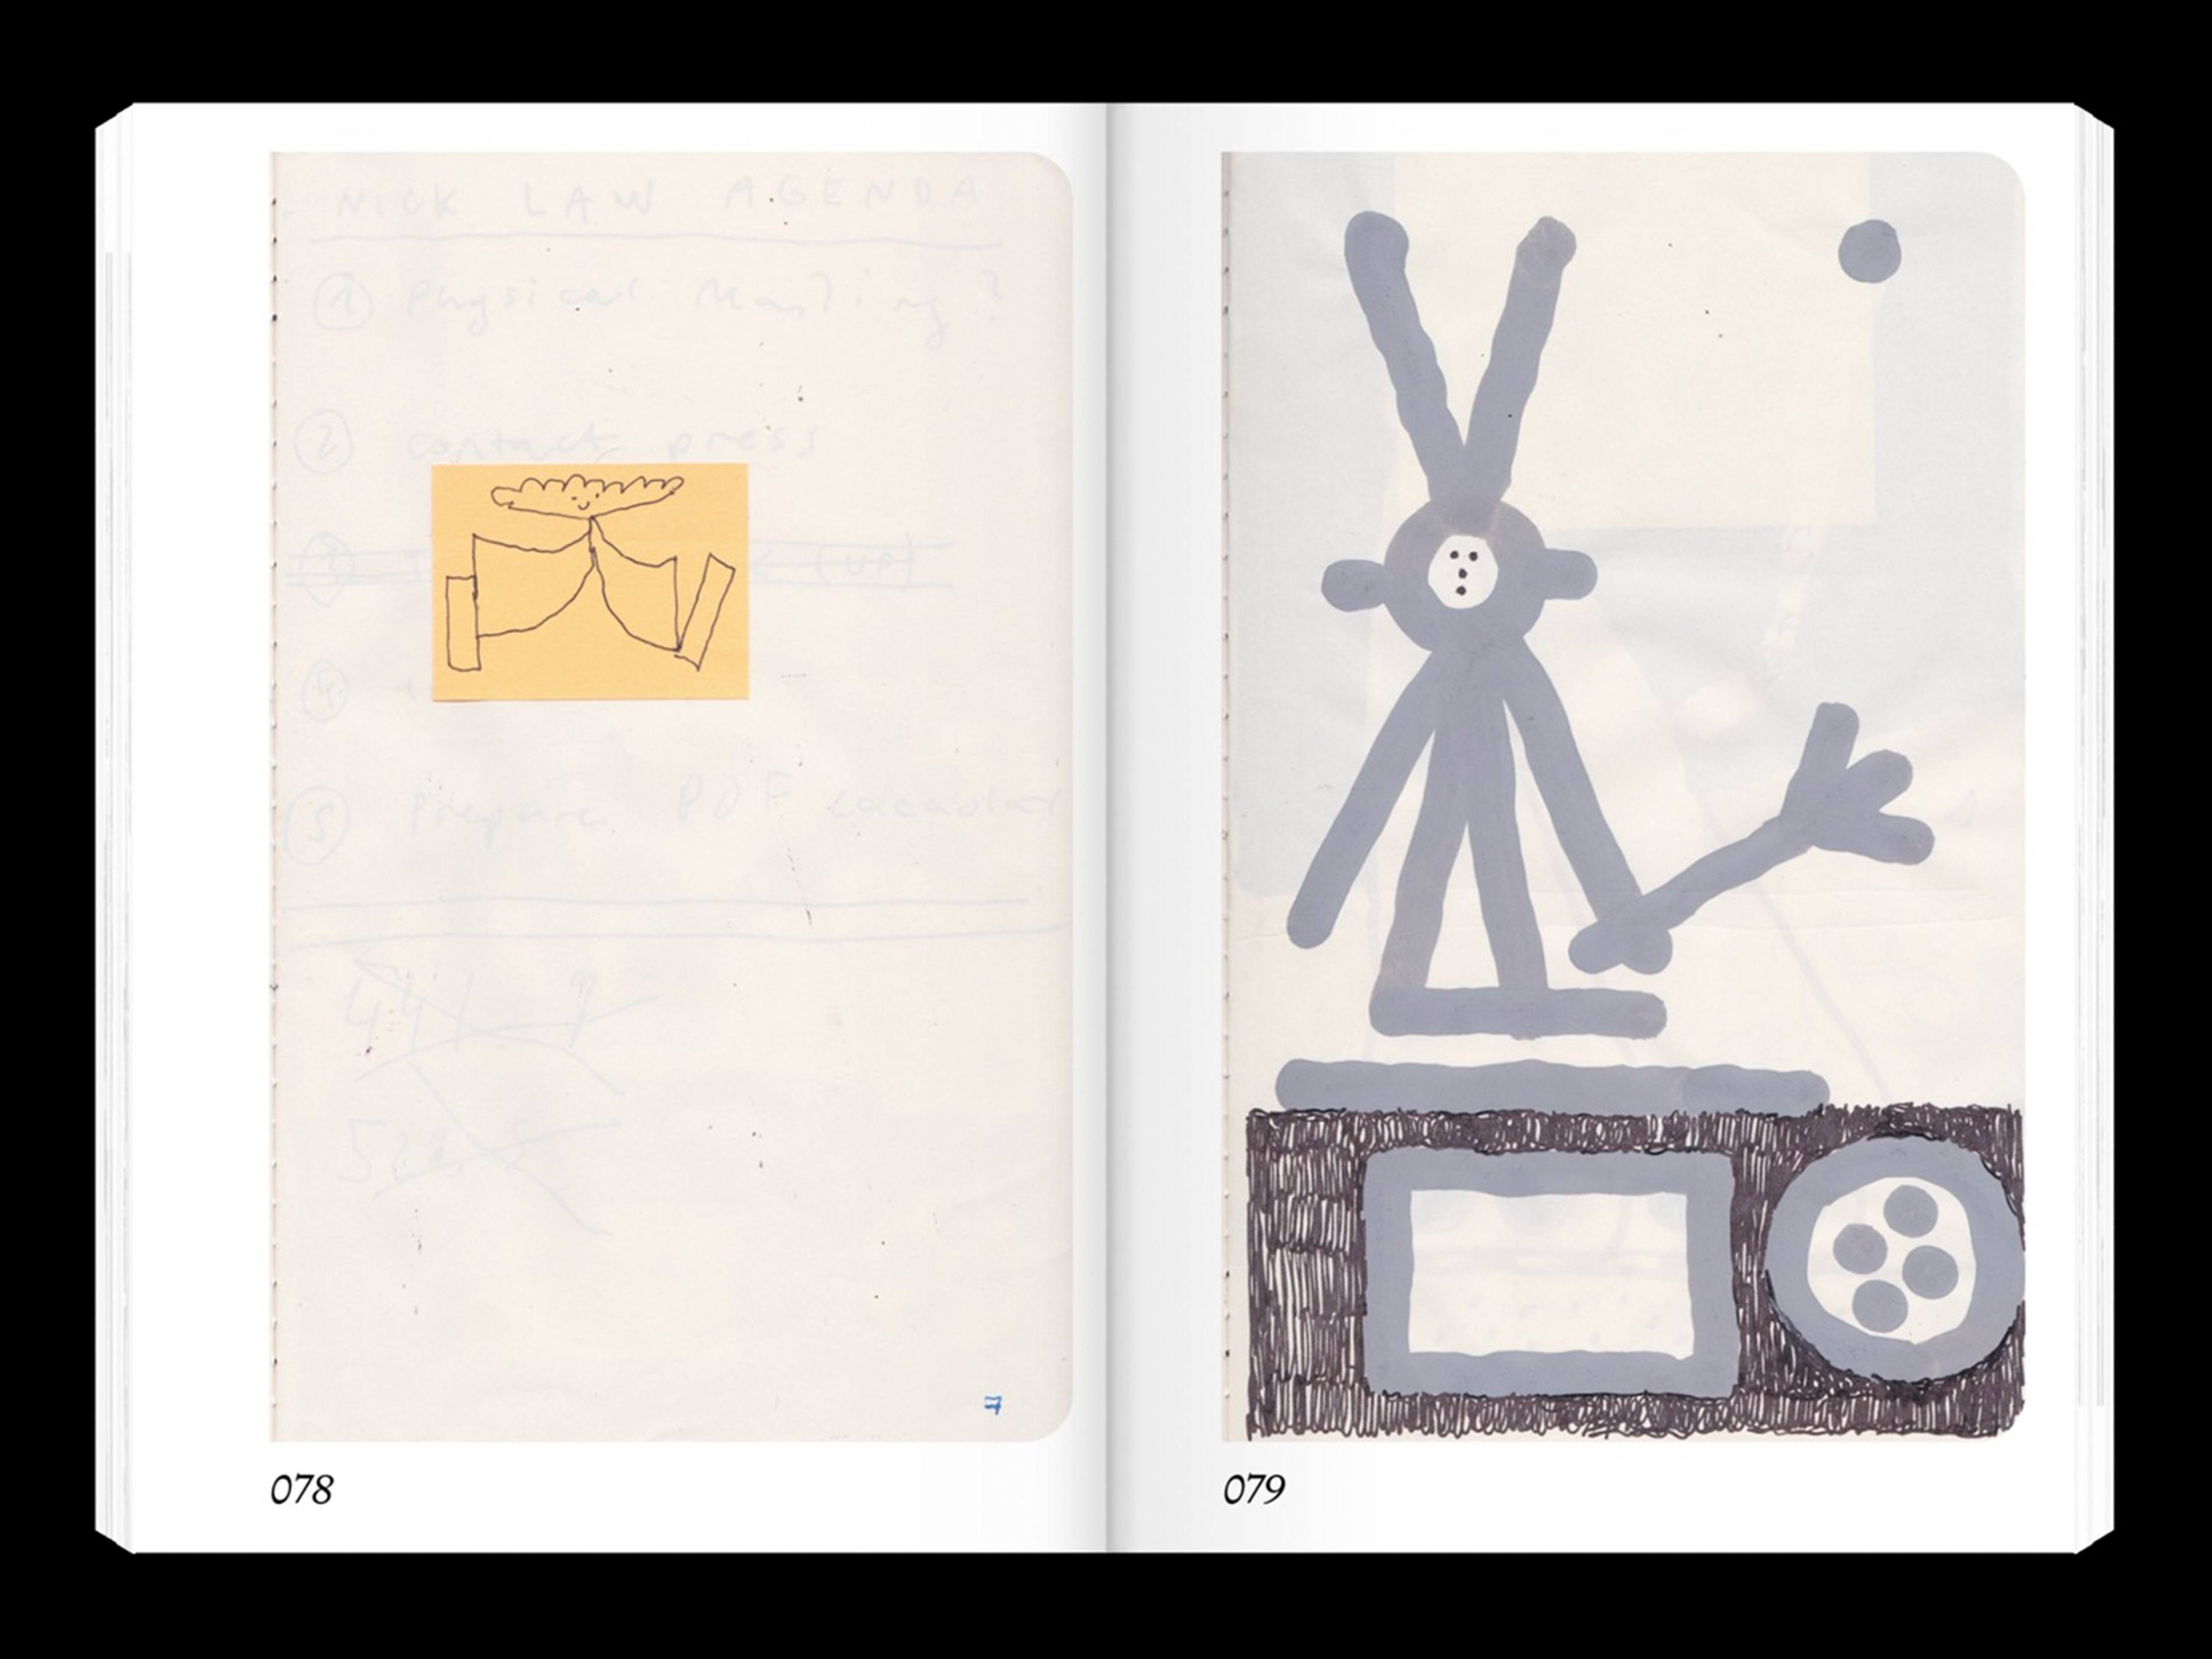 A double page from the book, on each page there is one drawing. The left drawing is small and you can see somebody walking. On the left drawing there is a grey person with very long hair growing upwards.